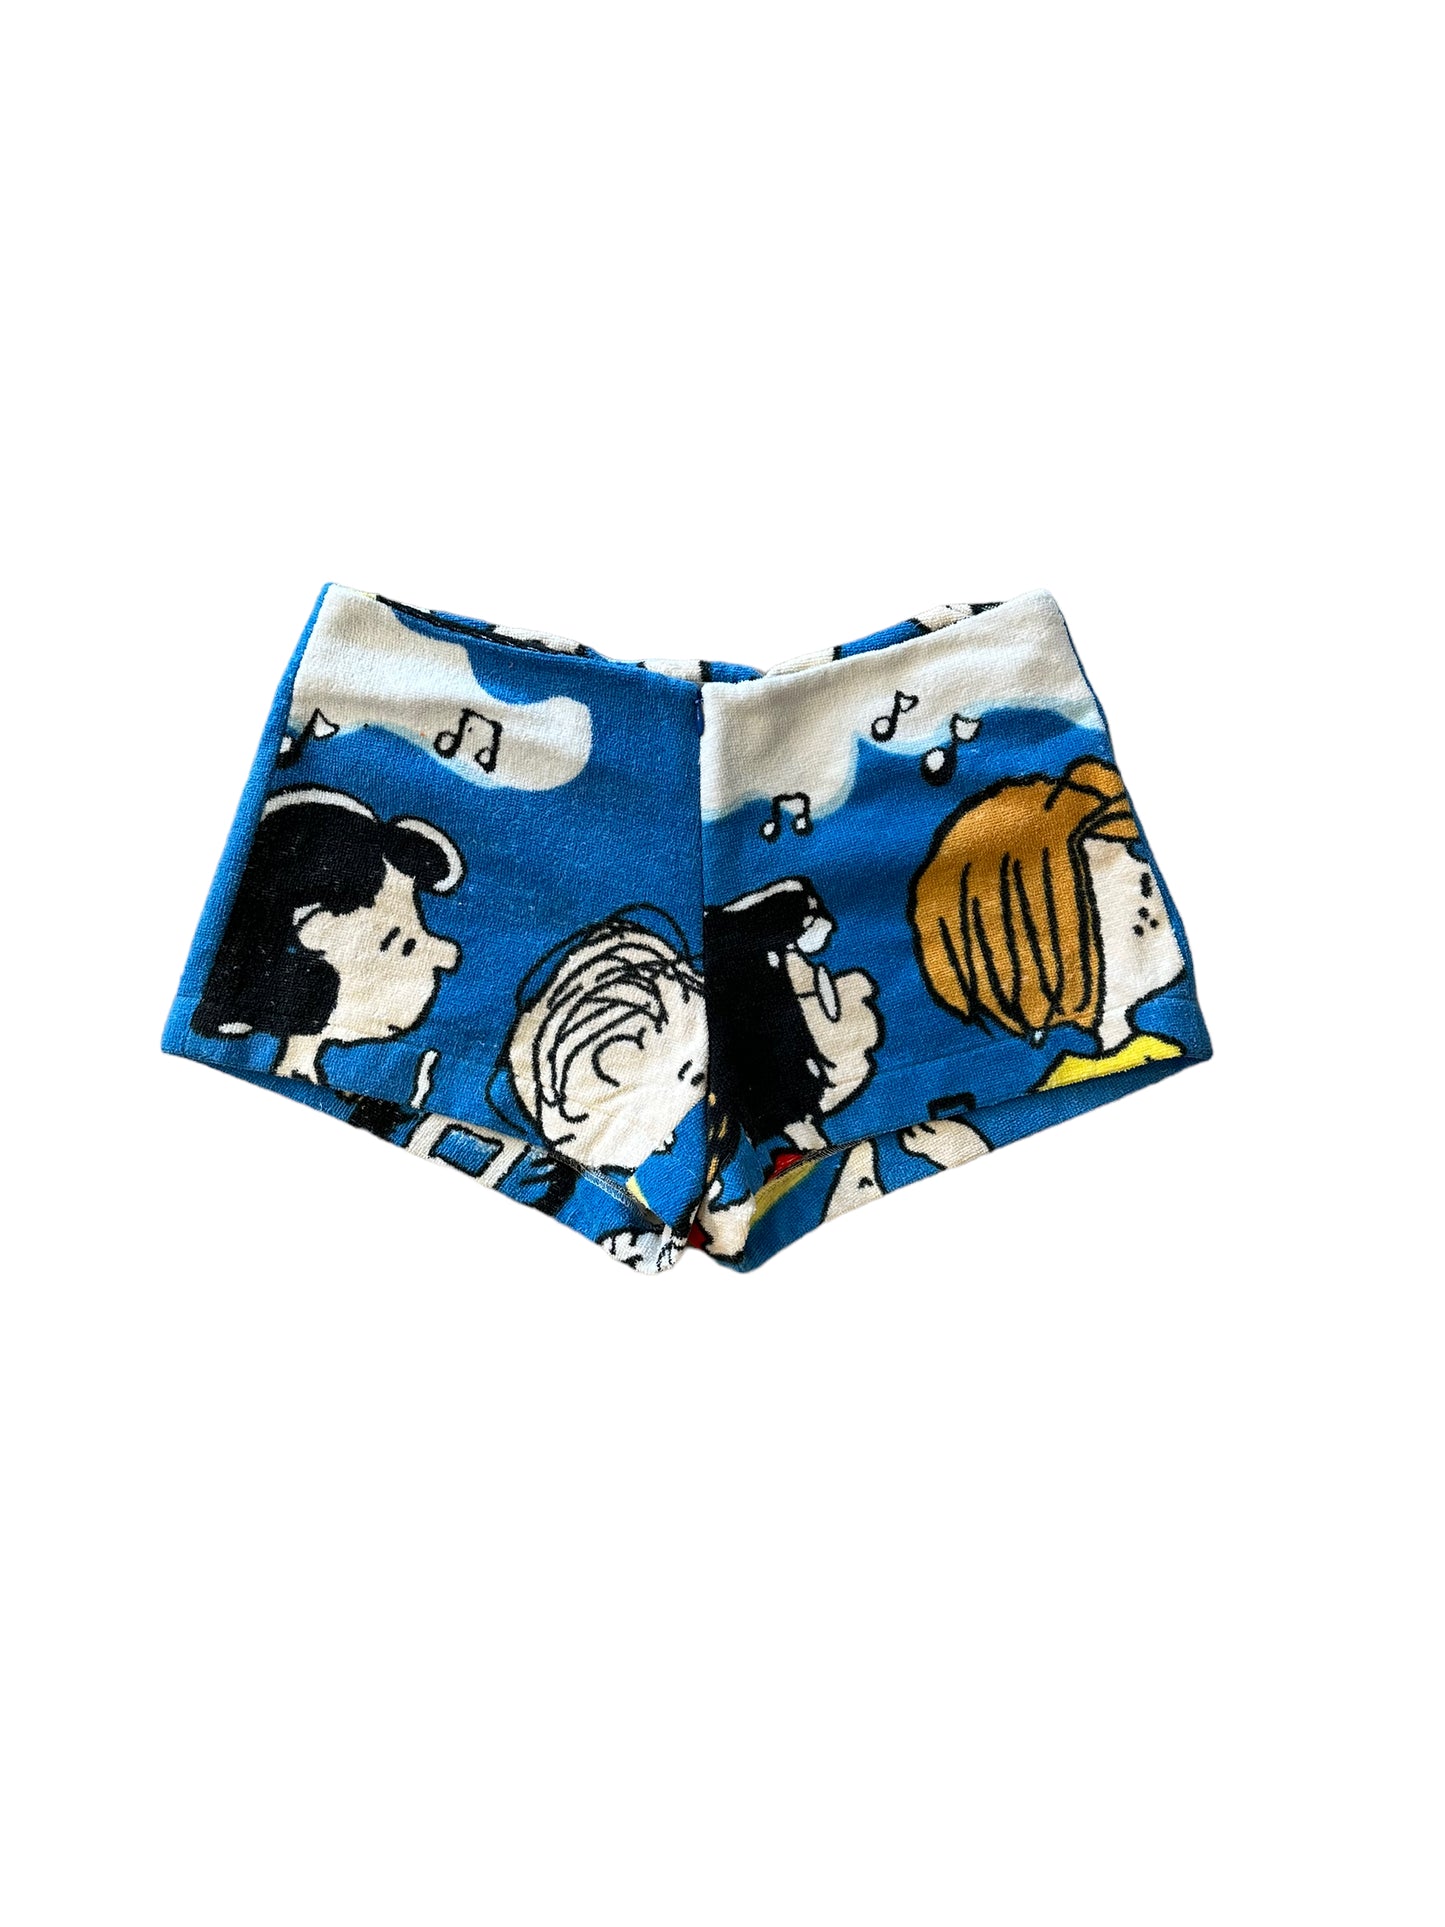 Queen Bee shorts in Snoopy, Come Home! (1972) At the Beach